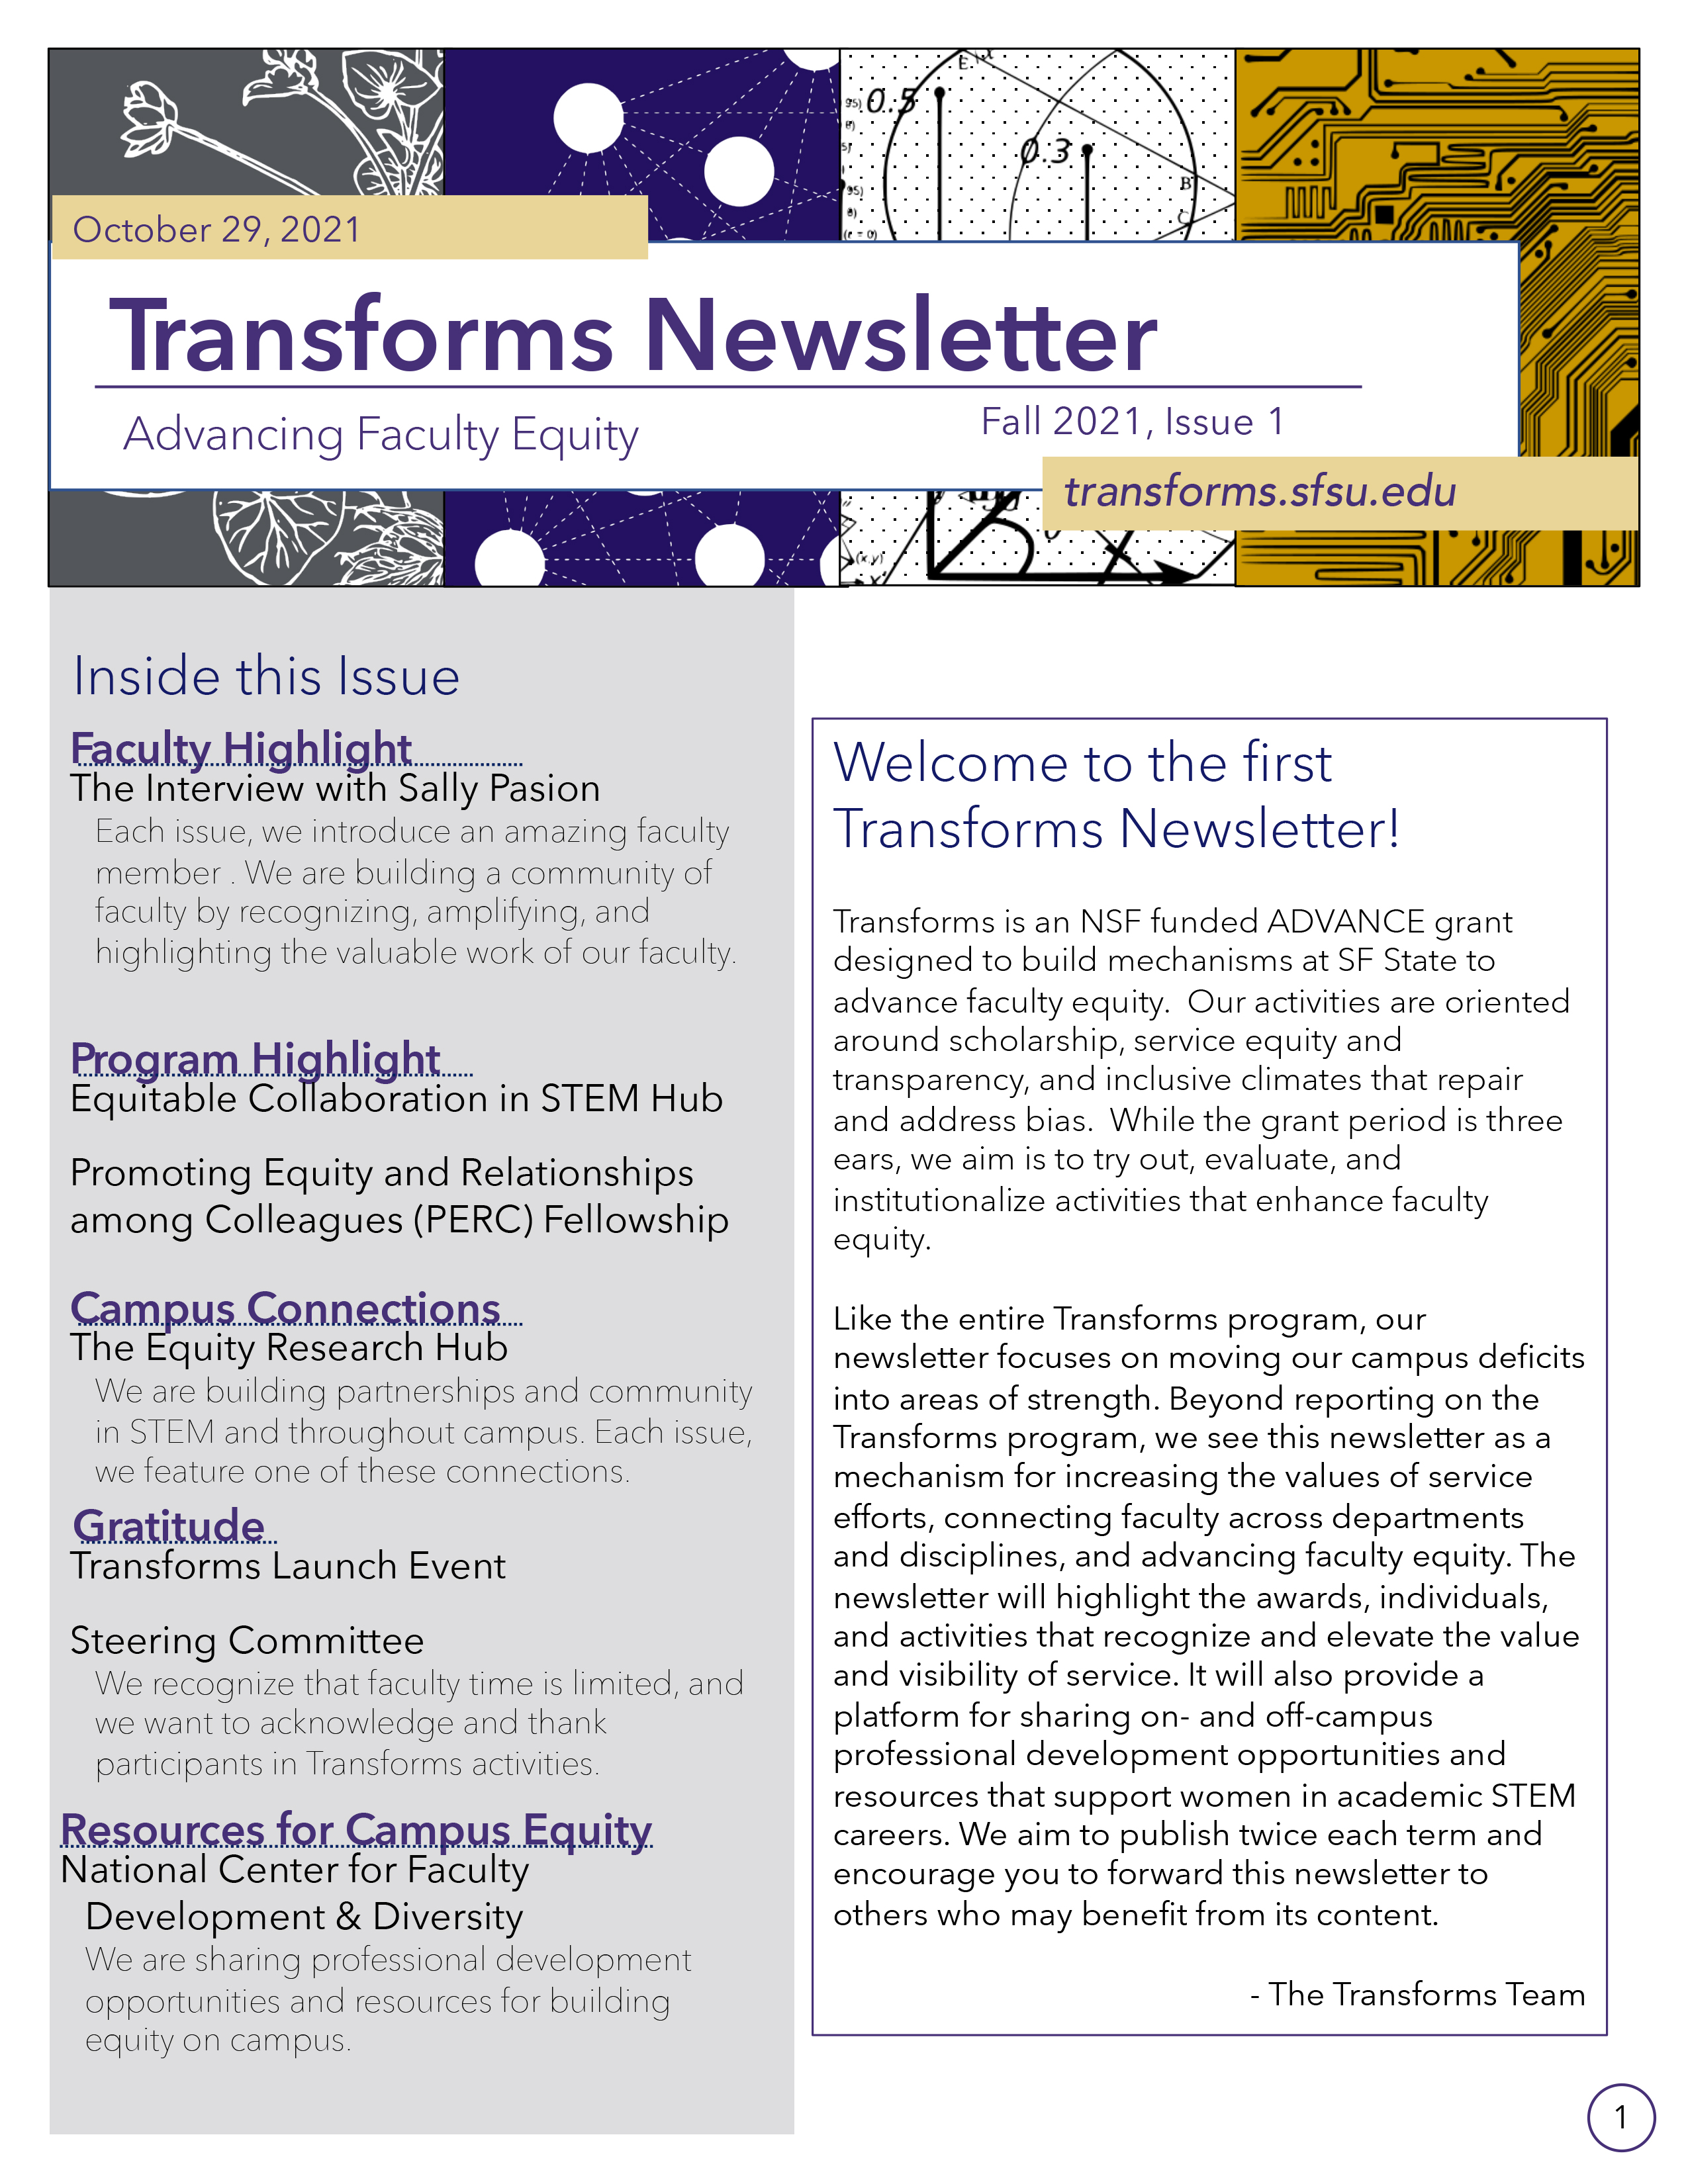 The cover of the inaugural issue of Transforms Newsletter